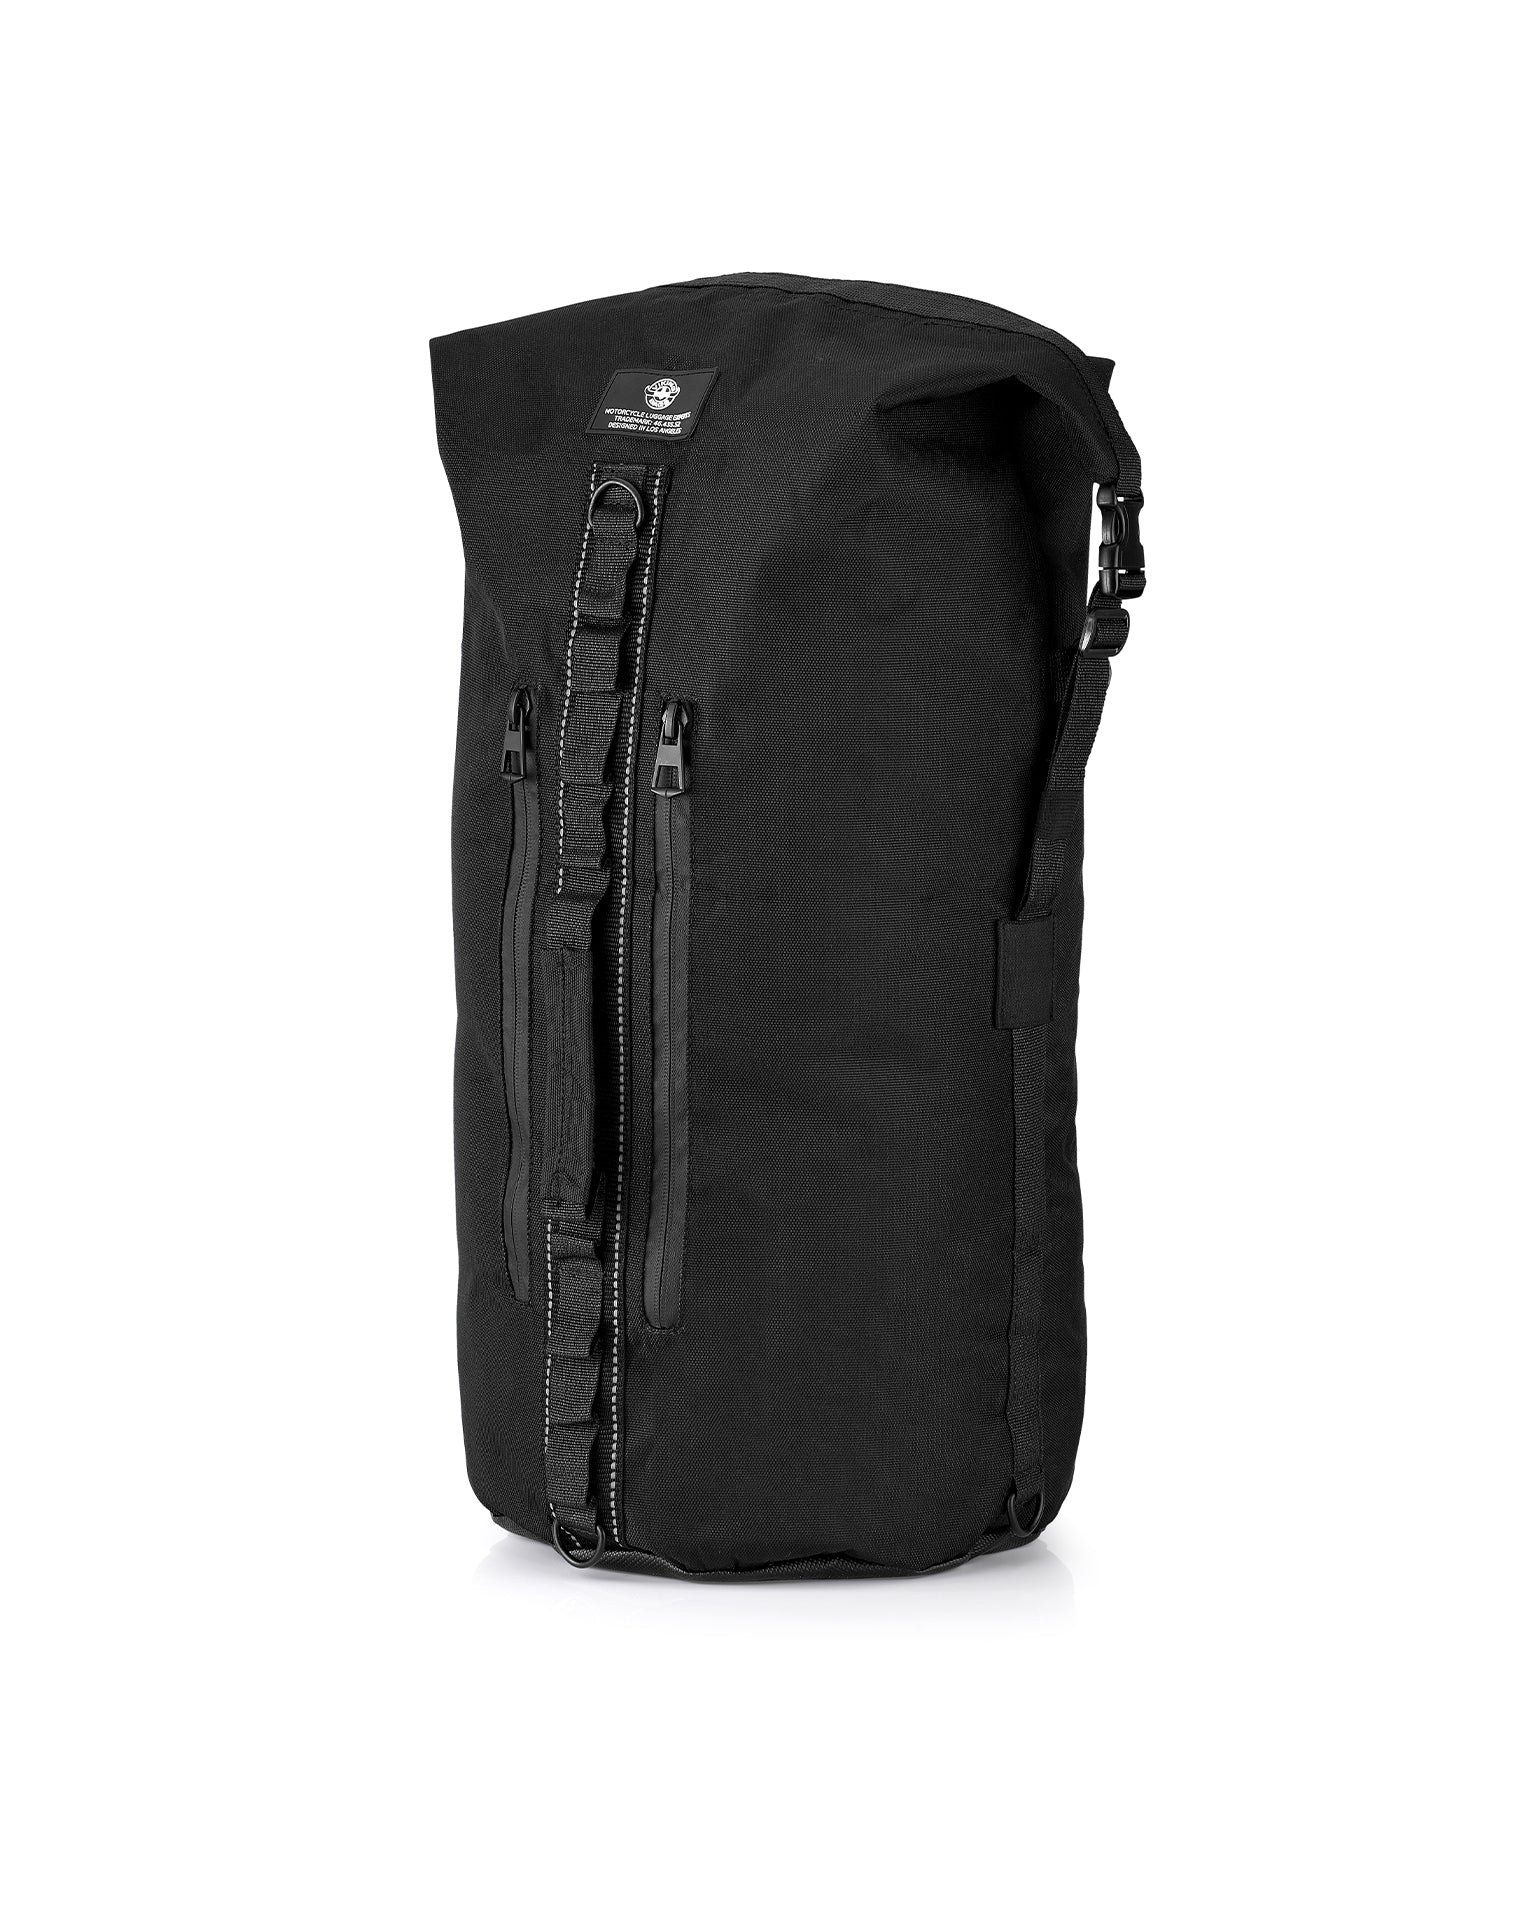 35L - Renegade XL Motorcycle Dry Backpack for Harley Davidson